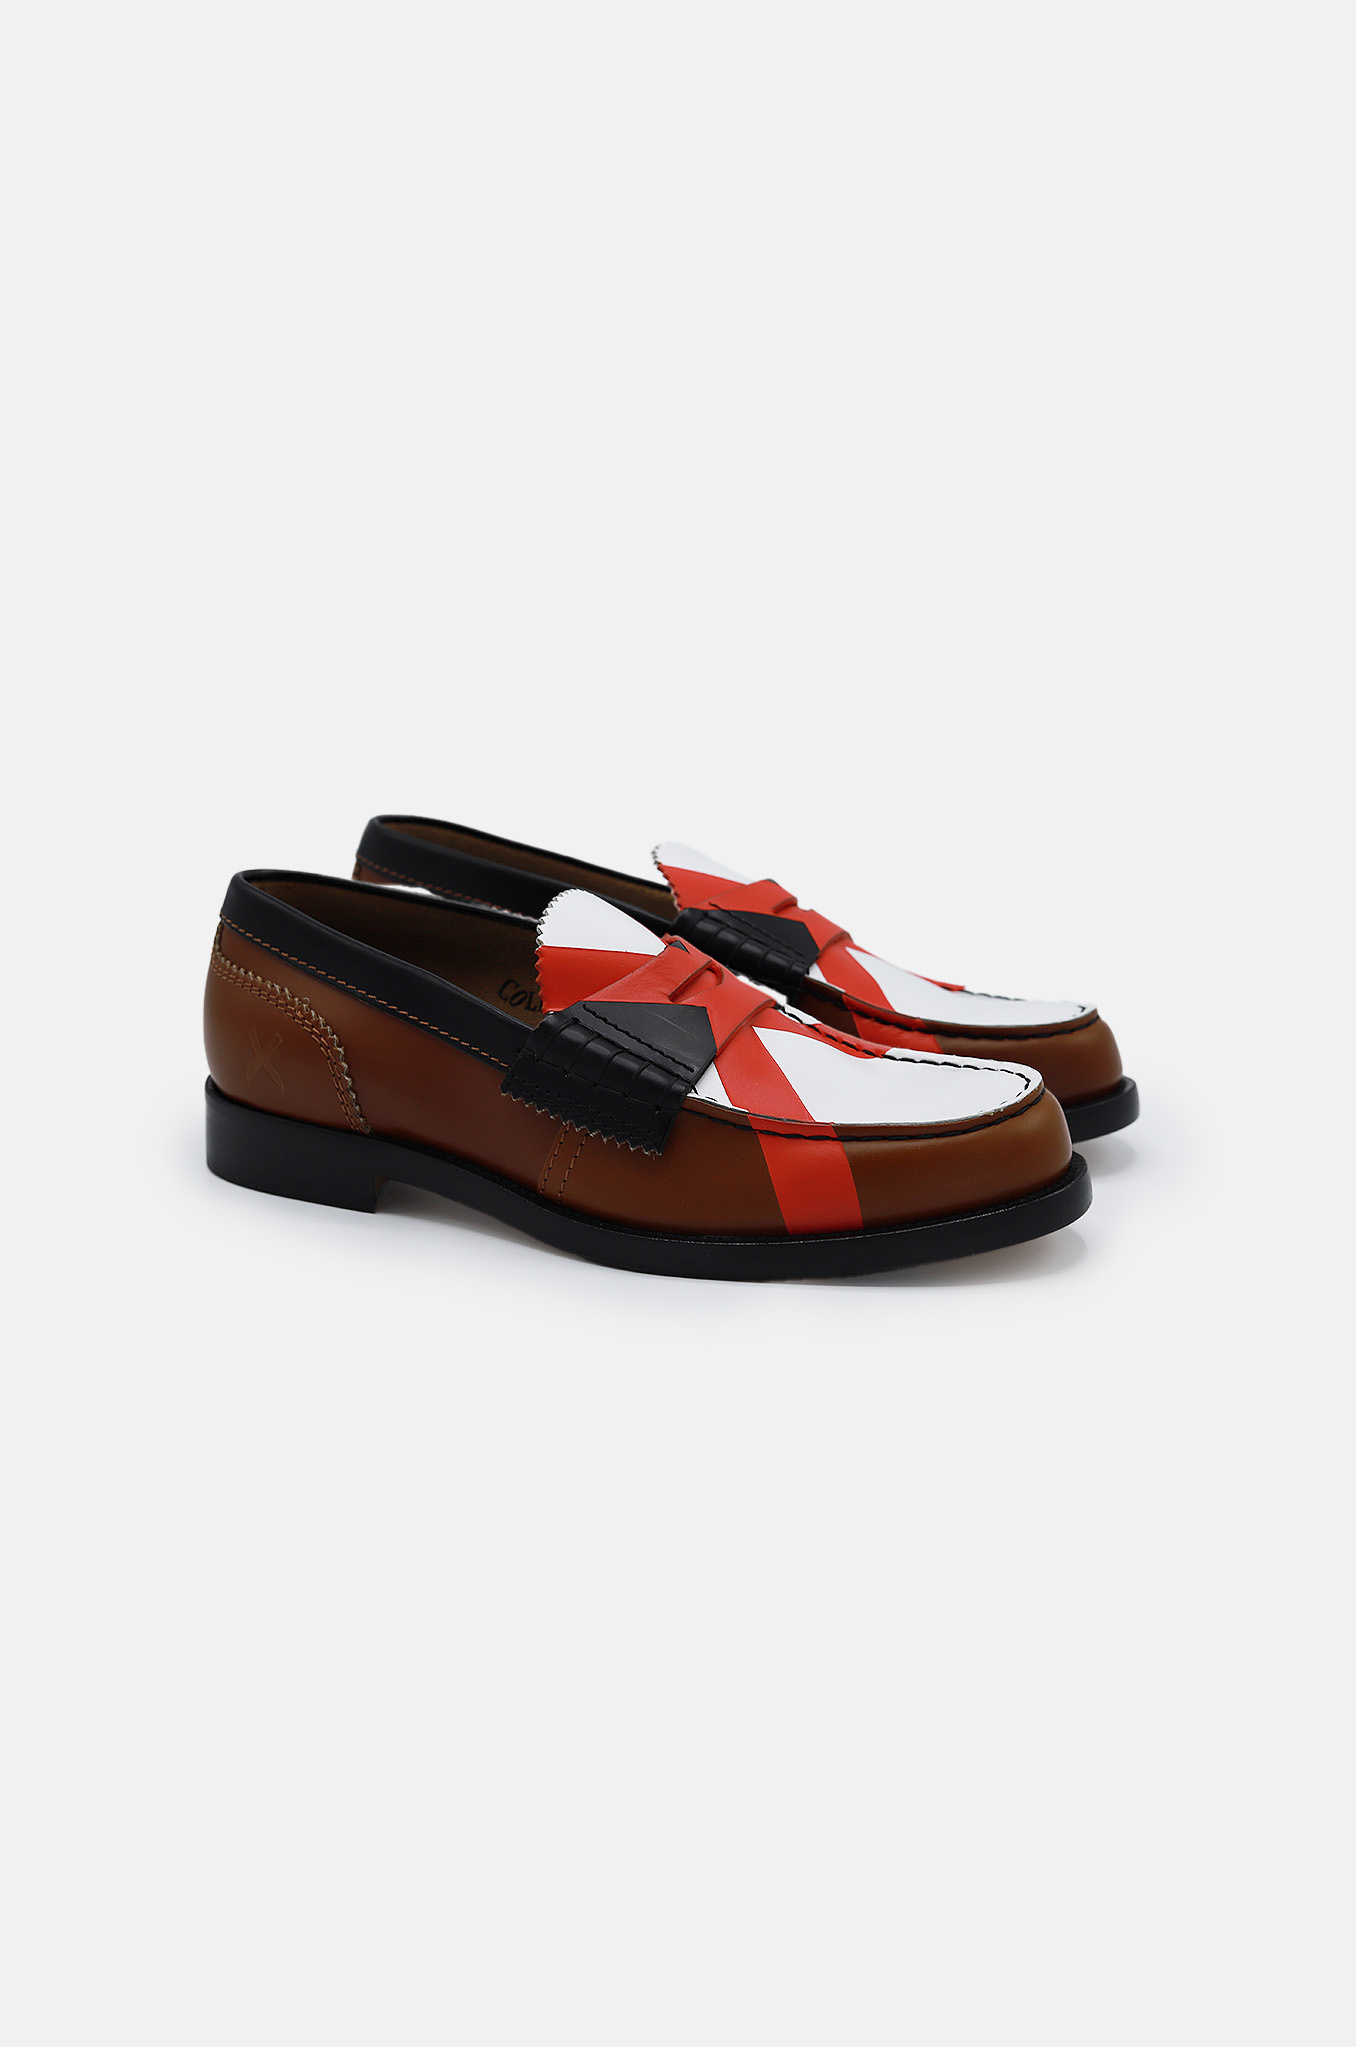 Loafers in Tan Black White X Red-5